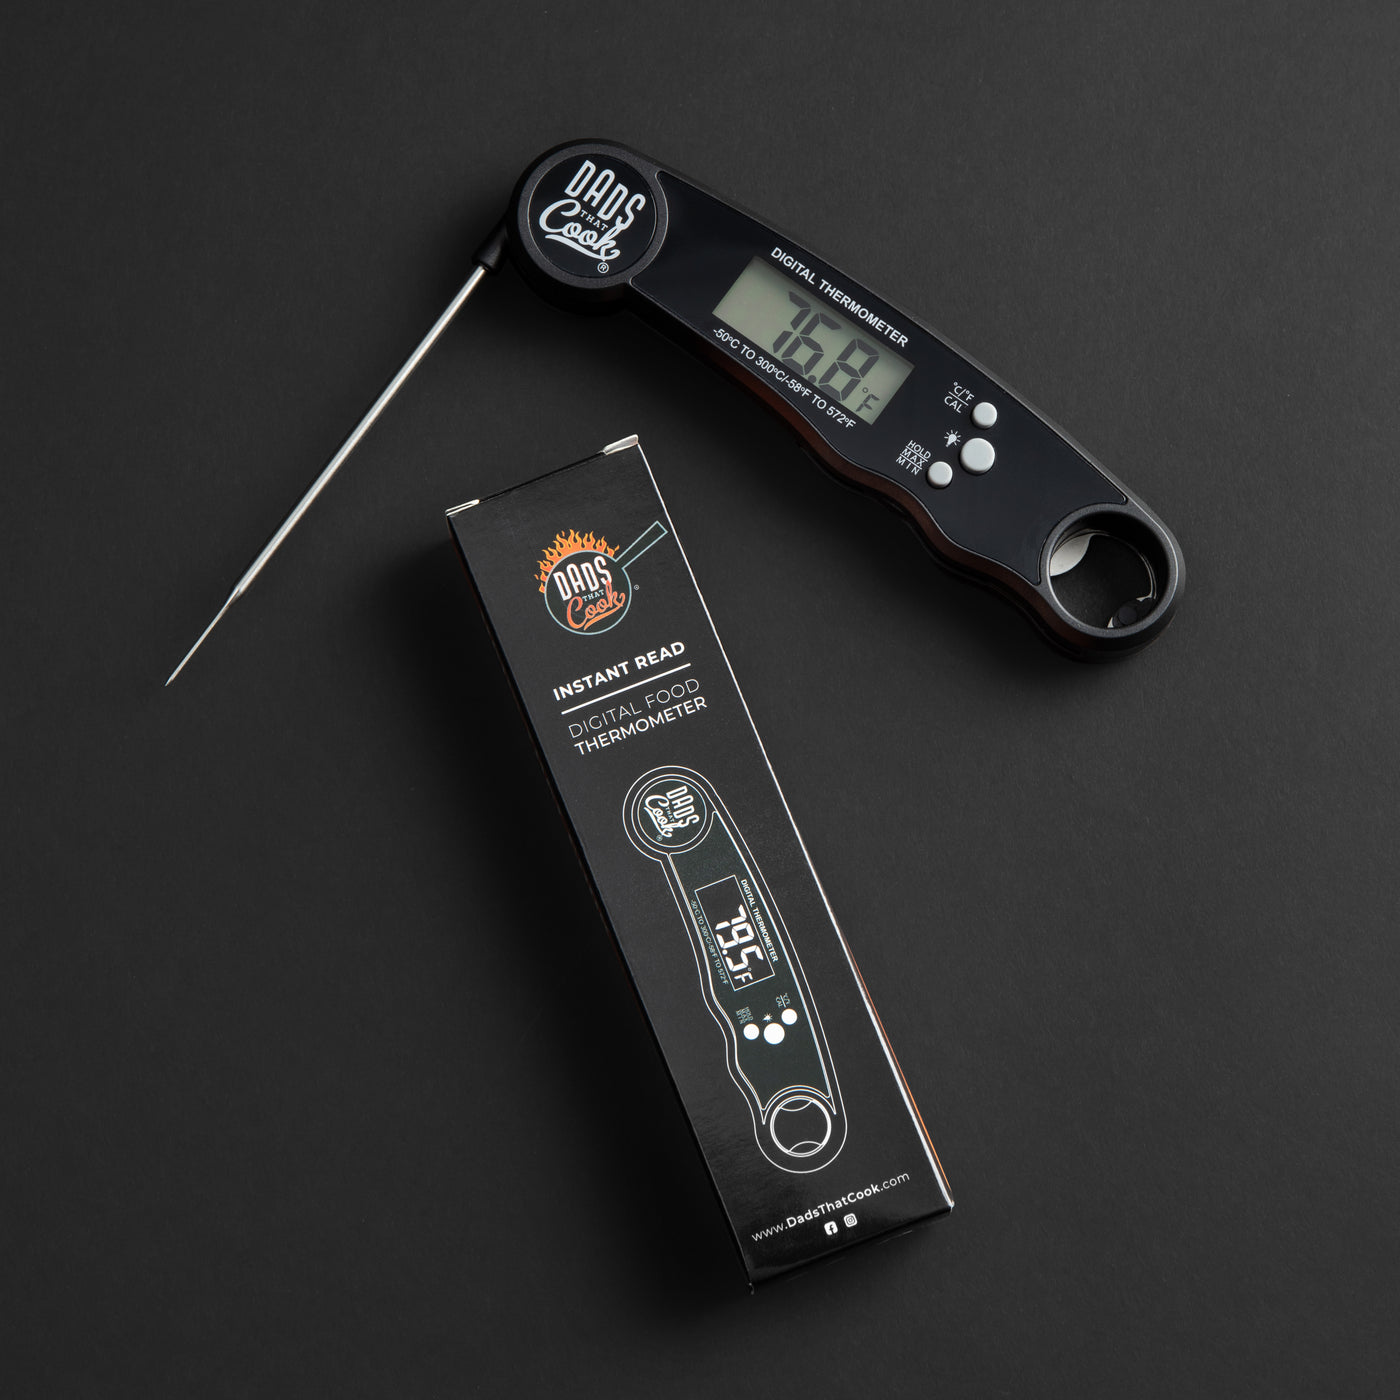 How to use an Instant Read Digital Meat Thermometer